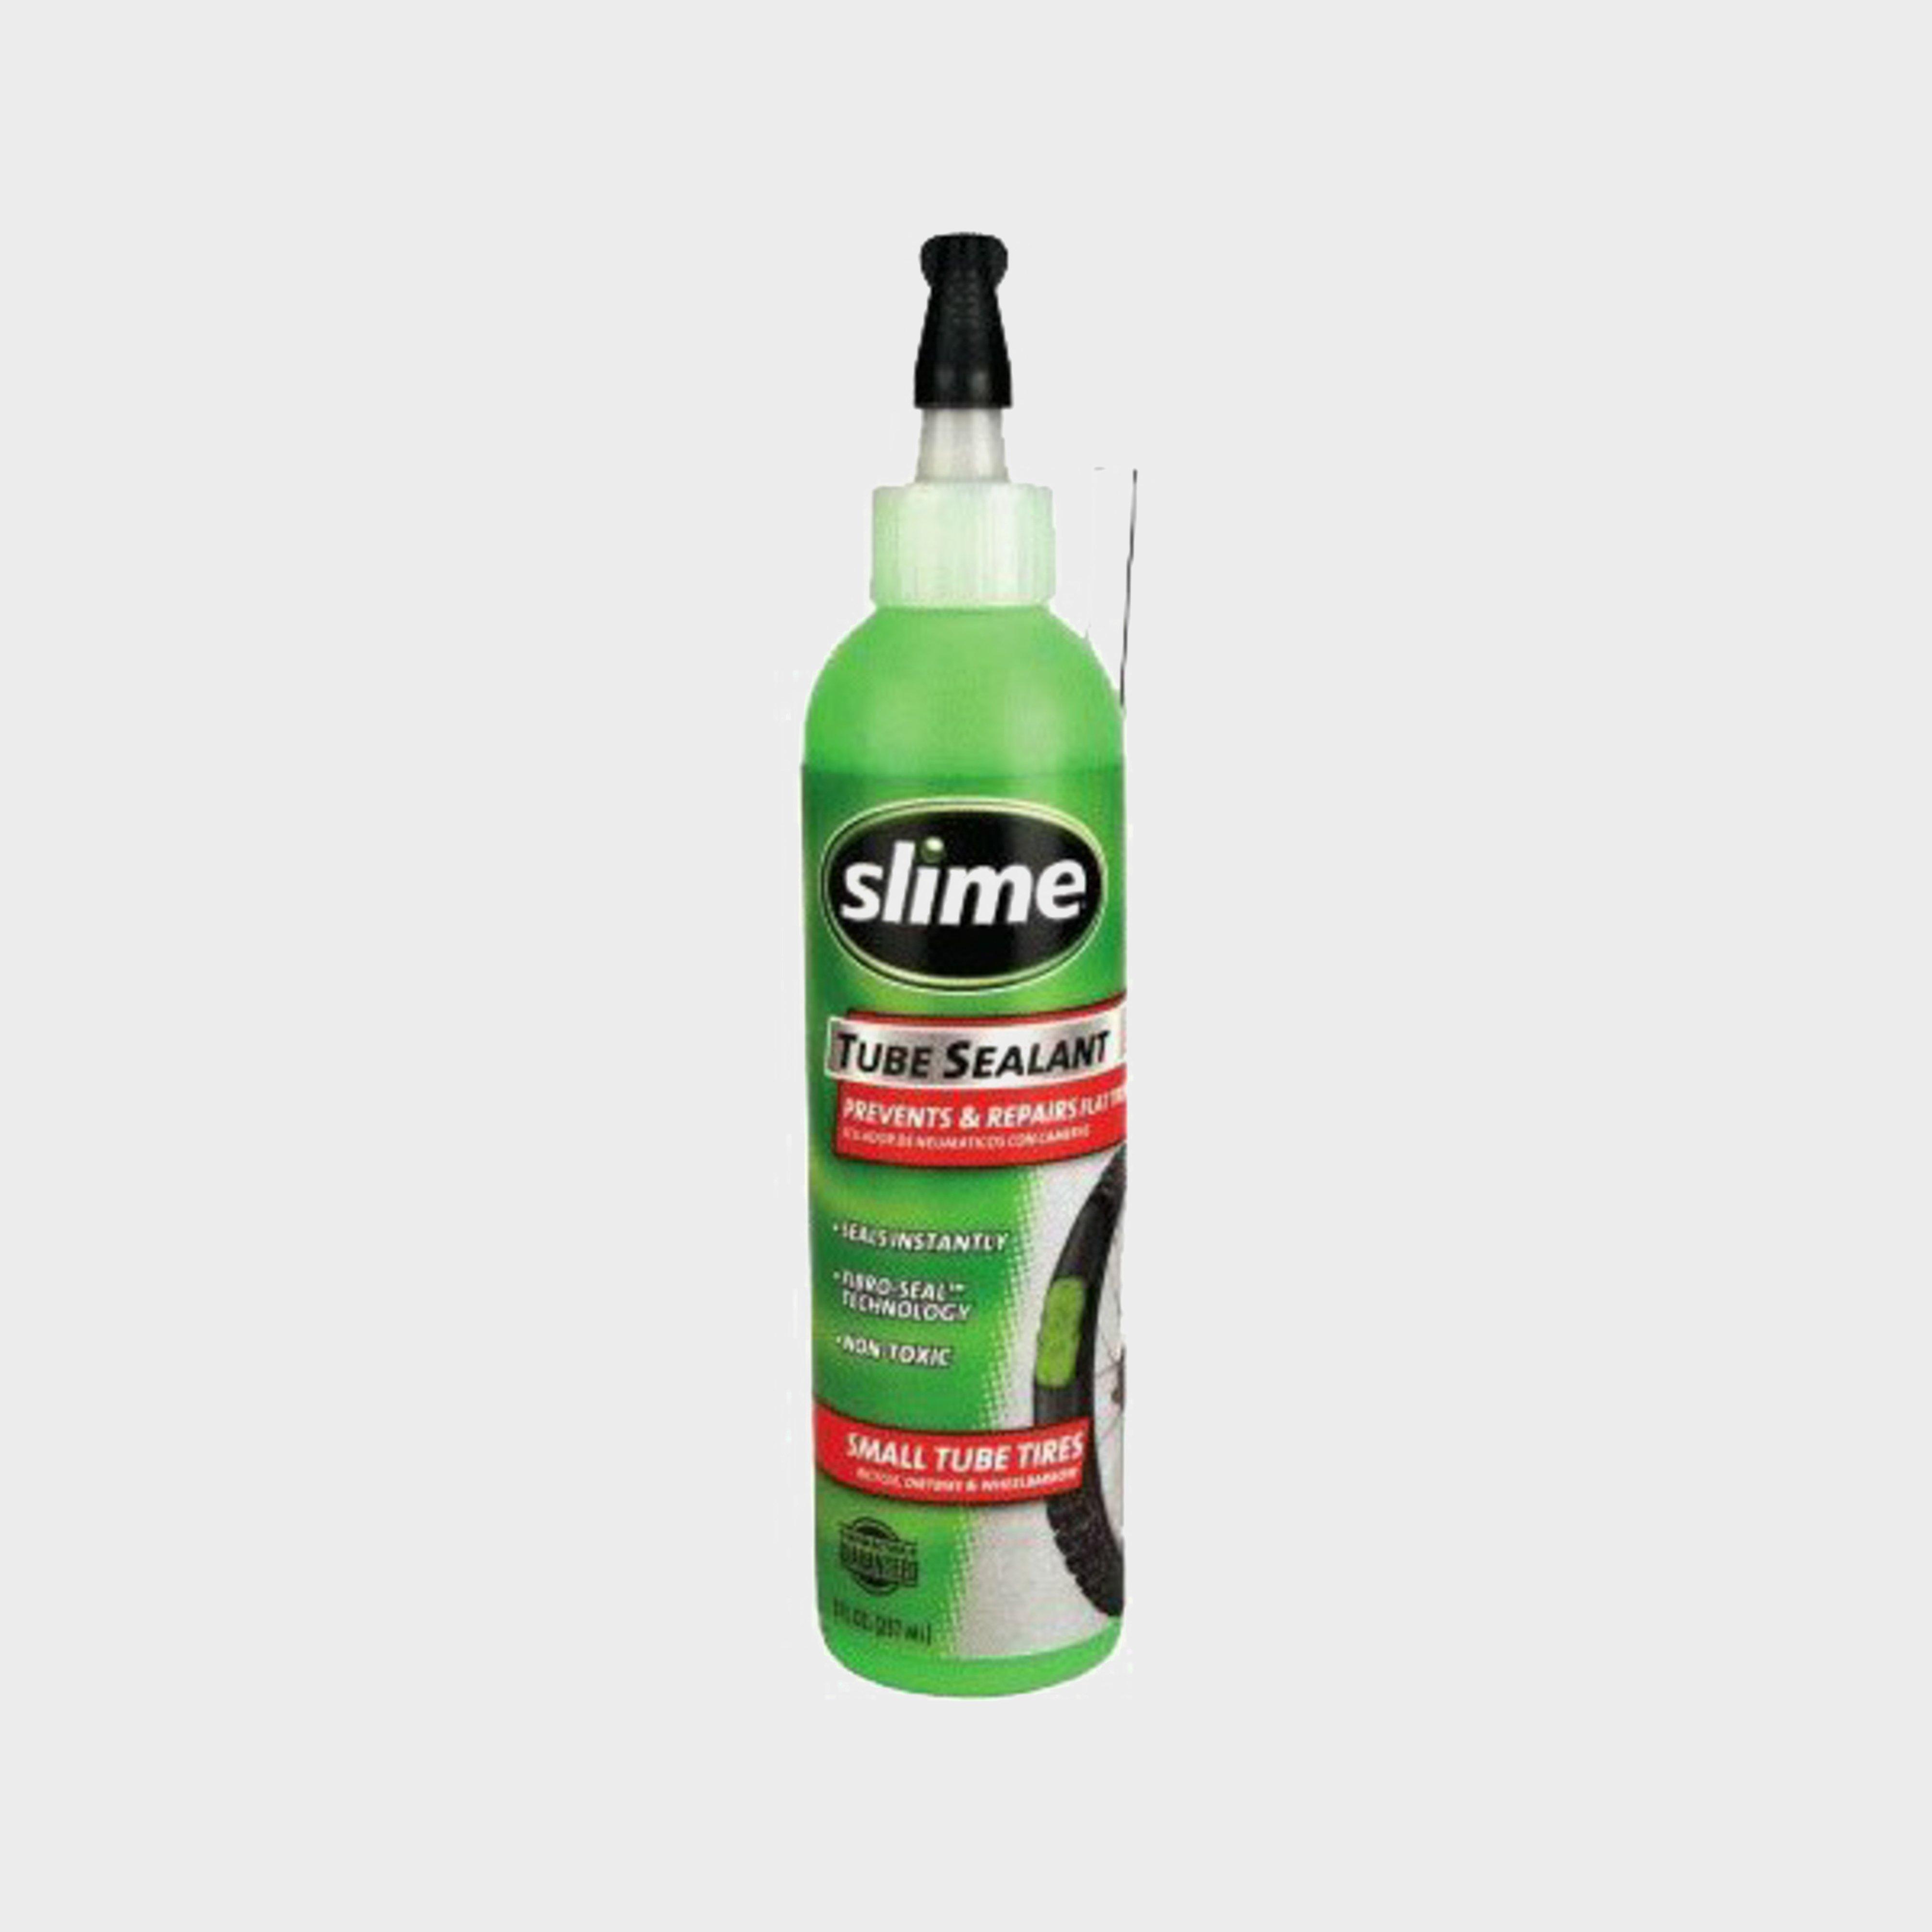 Raleigh Tube Sealant Puncture Preventor (8oz) - Green/preventor  Green/preventor